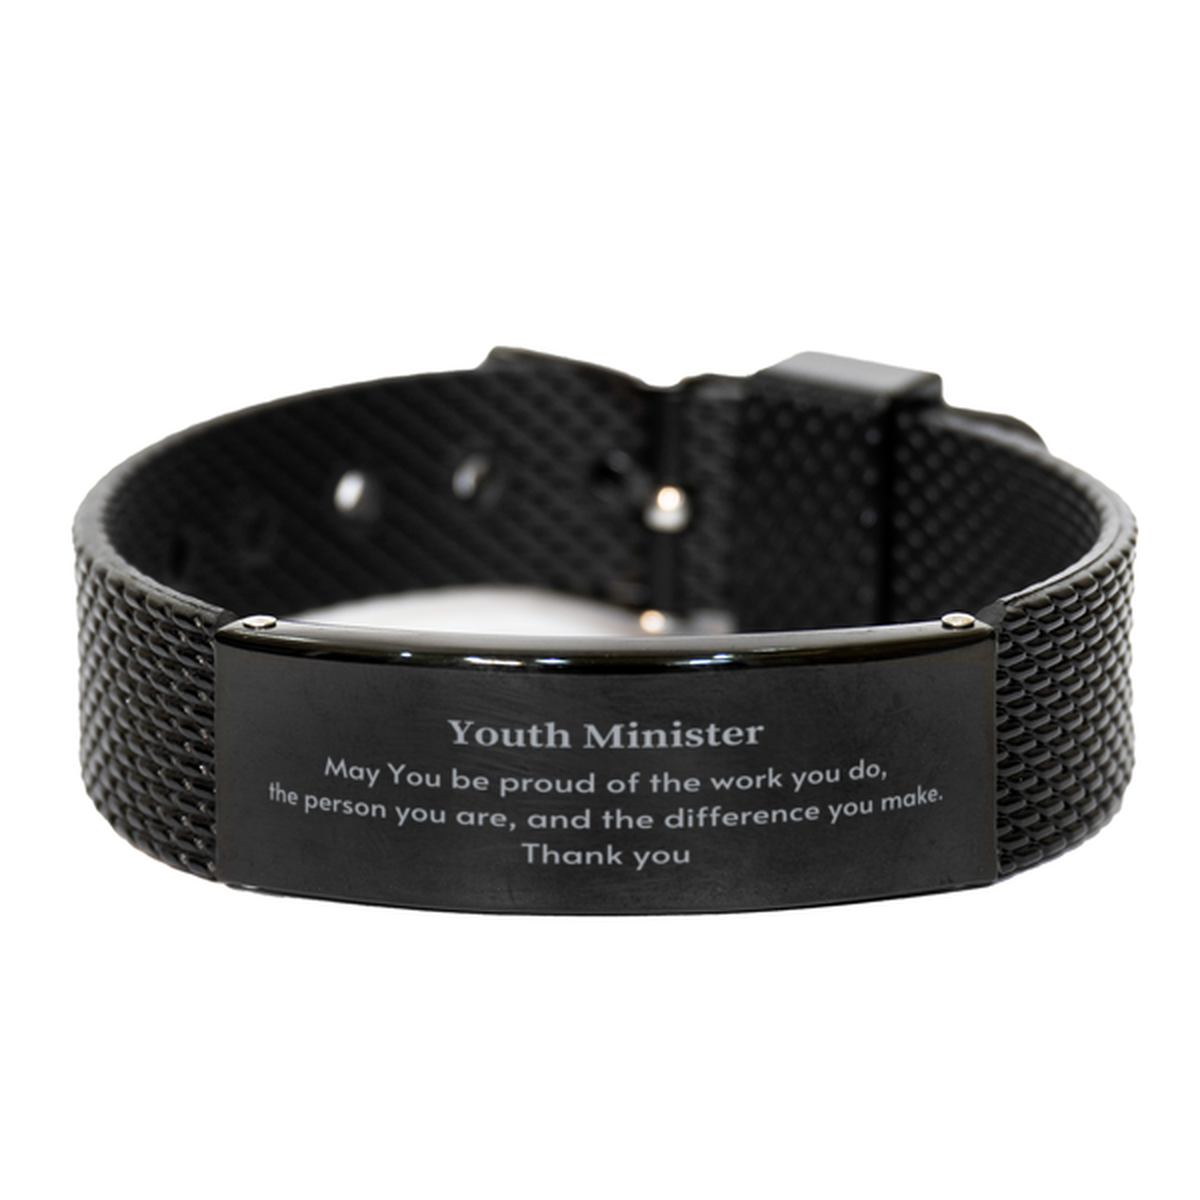 Heartwarming Black Shark Mesh Bracelet Retirement Coworkers Gifts for Youth Minister, Youth Minister May You be proud of the work you do, the person you are Gifts for Boss Men Women Friends